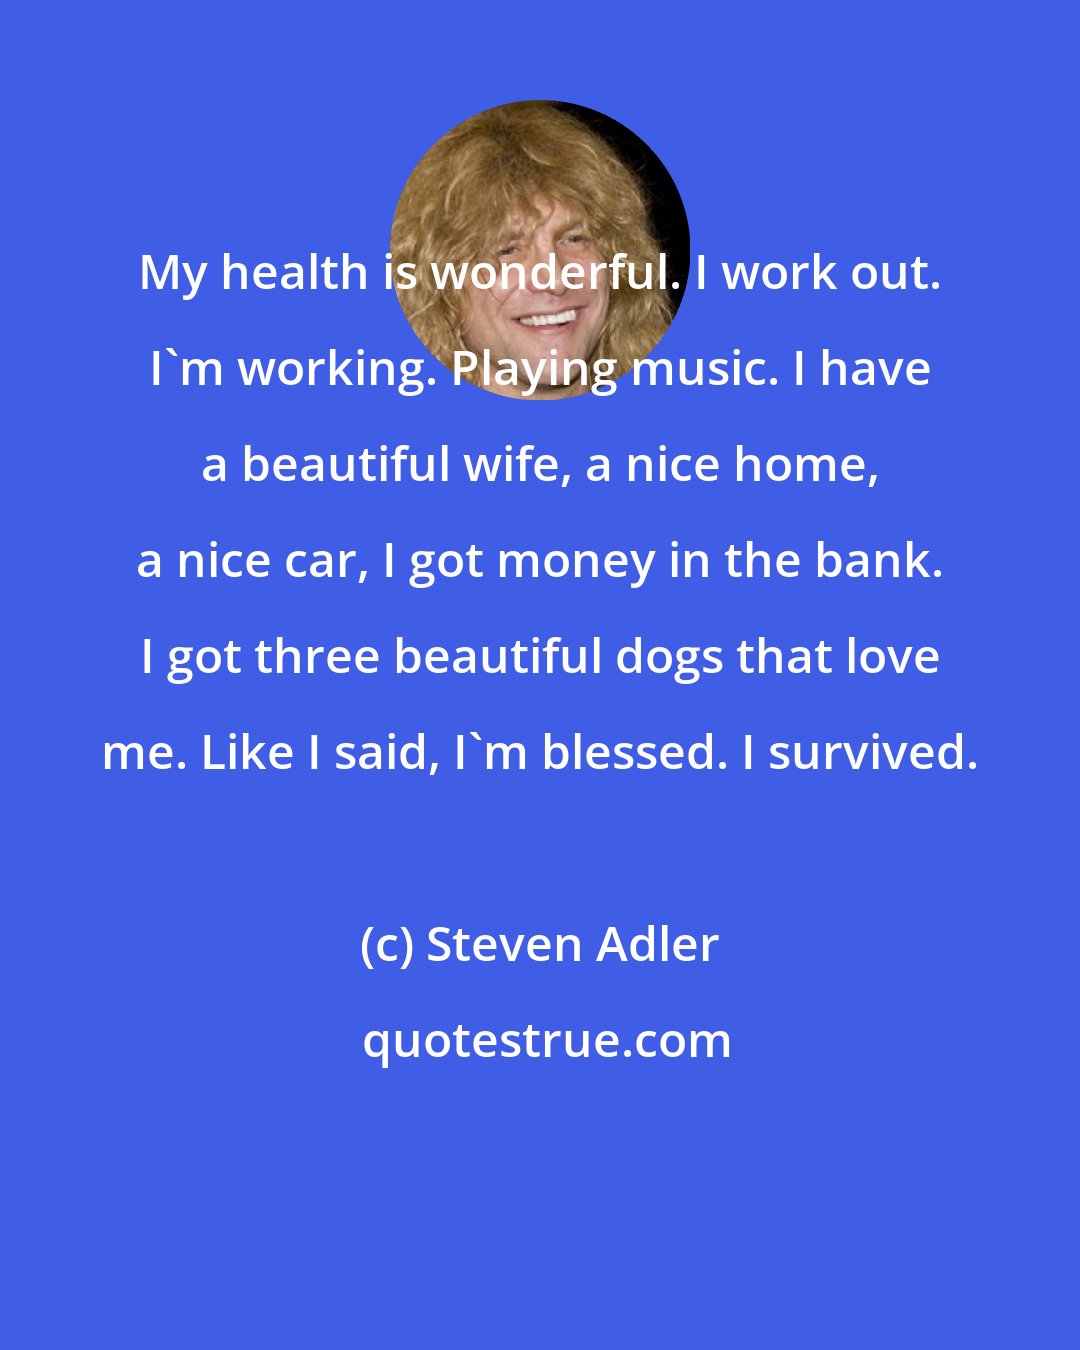 Steven Adler: My health is wonderful. I work out. I'm working. Playing music. I have a beautiful wife, a nice home, a nice car, I got money in the bank. I got three beautiful dogs that love me. Like I said, I'm blessed. I survived.